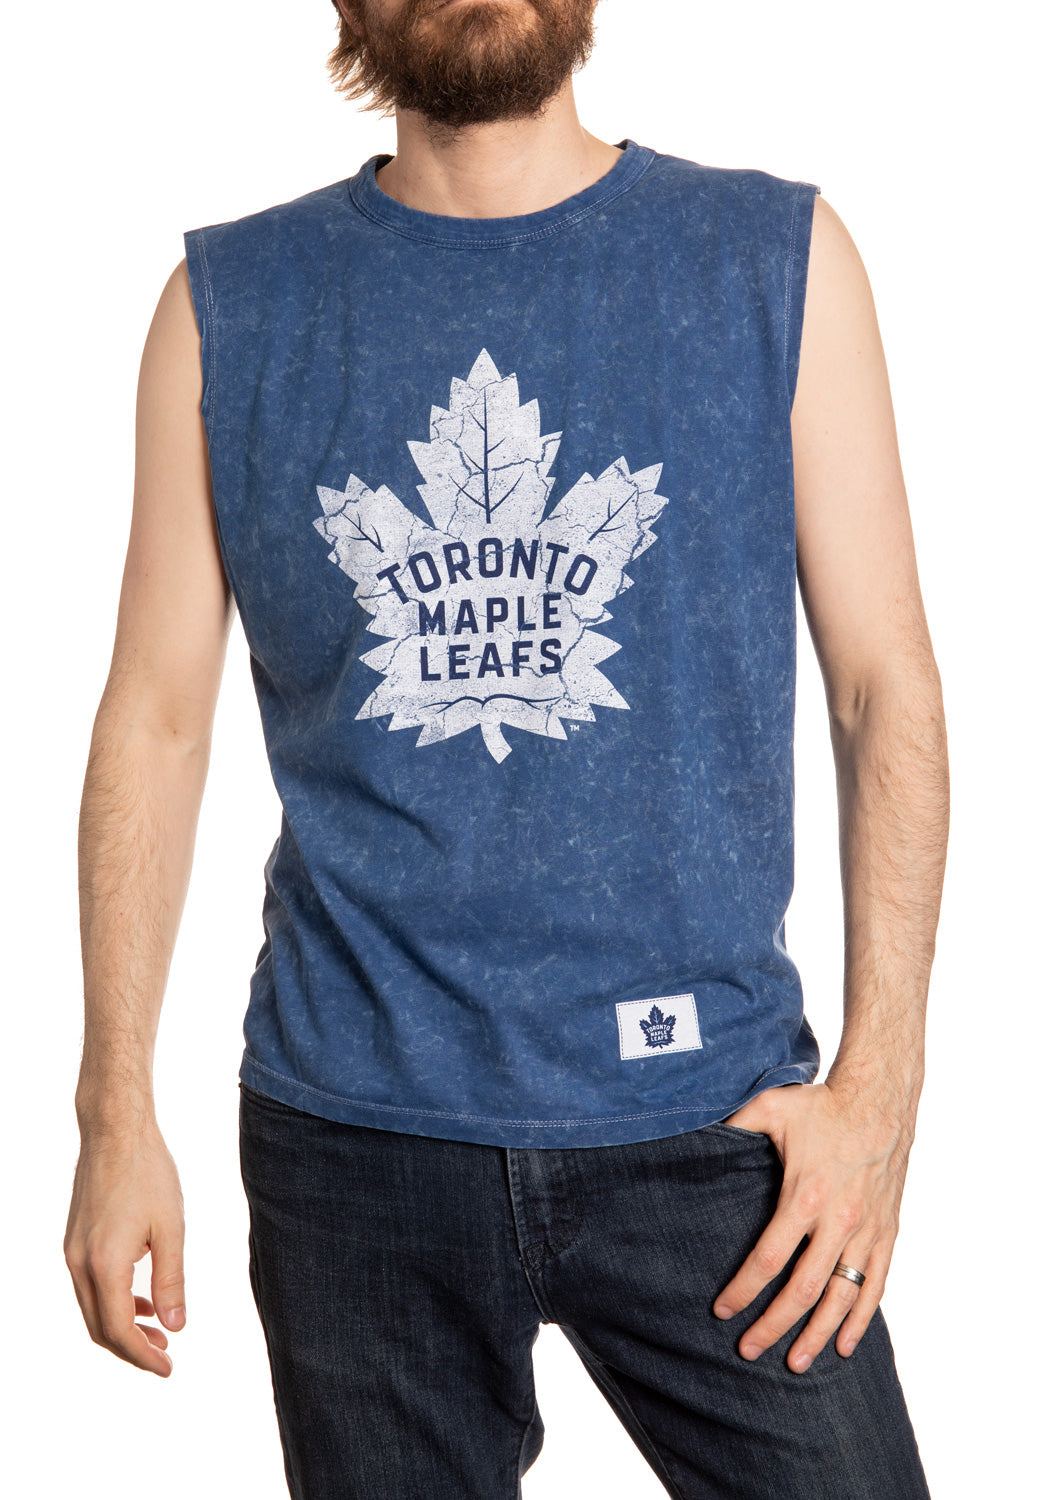 Toronto Maple Leafs Acid Washed Sleeveless Shirt Front View